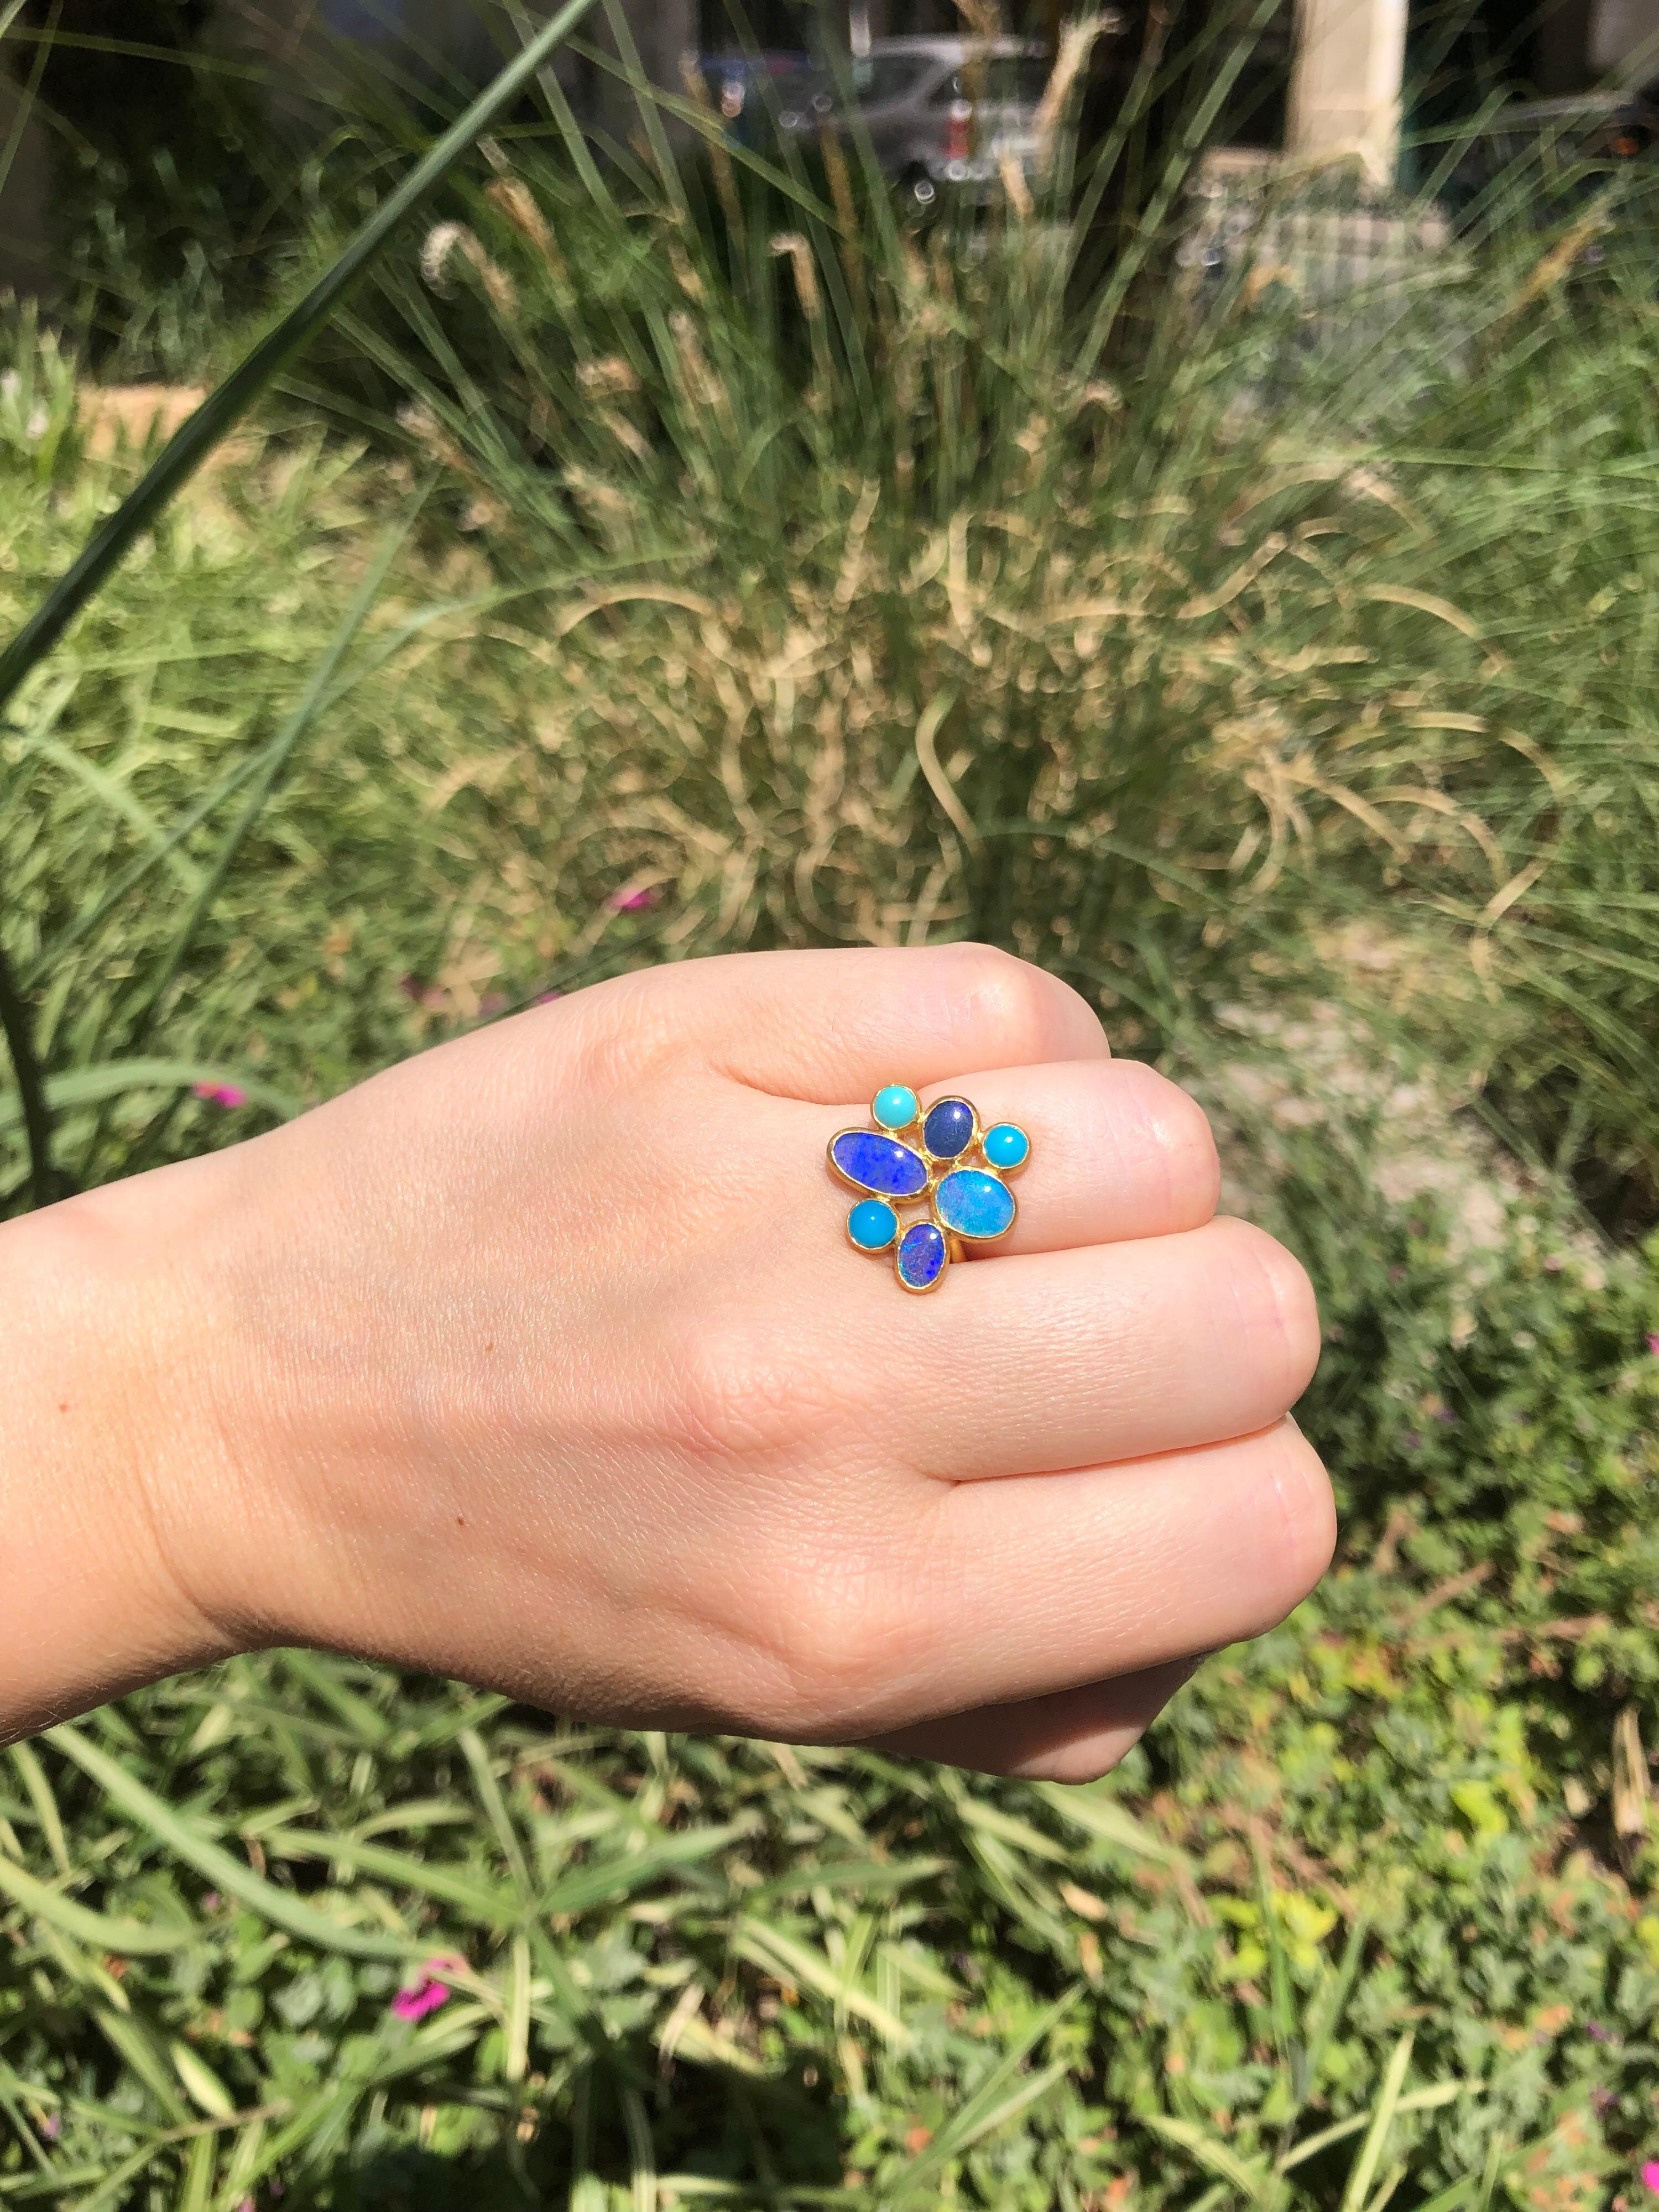 This ring by Scrives is composed of 4 blue opals (total weight: 4.24cts) and 3 matching colours turquoises (total weight: 0.82cts). 
All stones are cabochons and the opals are doublets. Extra care and attention should be given to avoid damaging the